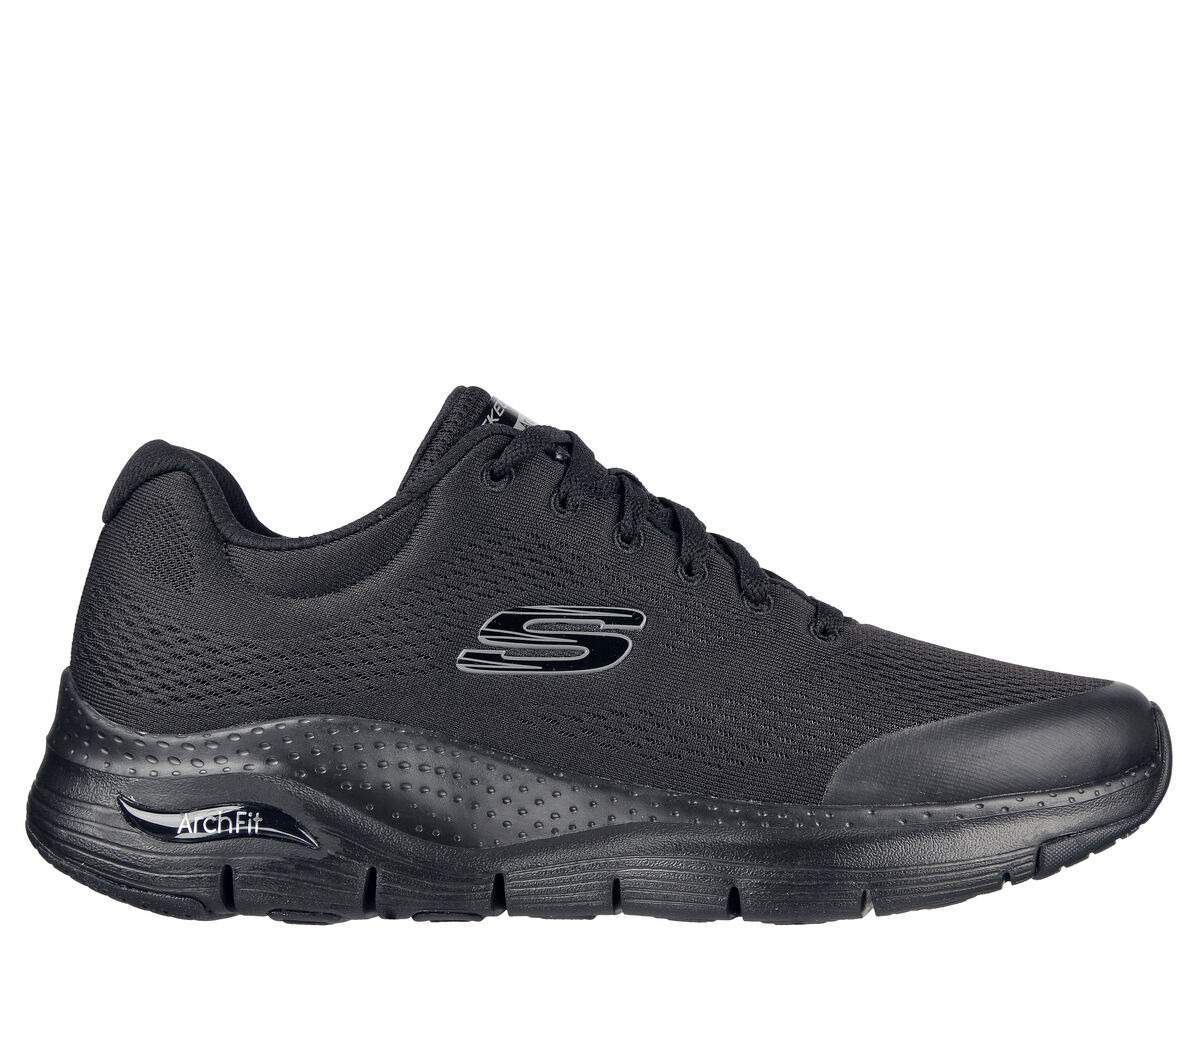 Where Can I Buy Arch Fit Skechers?